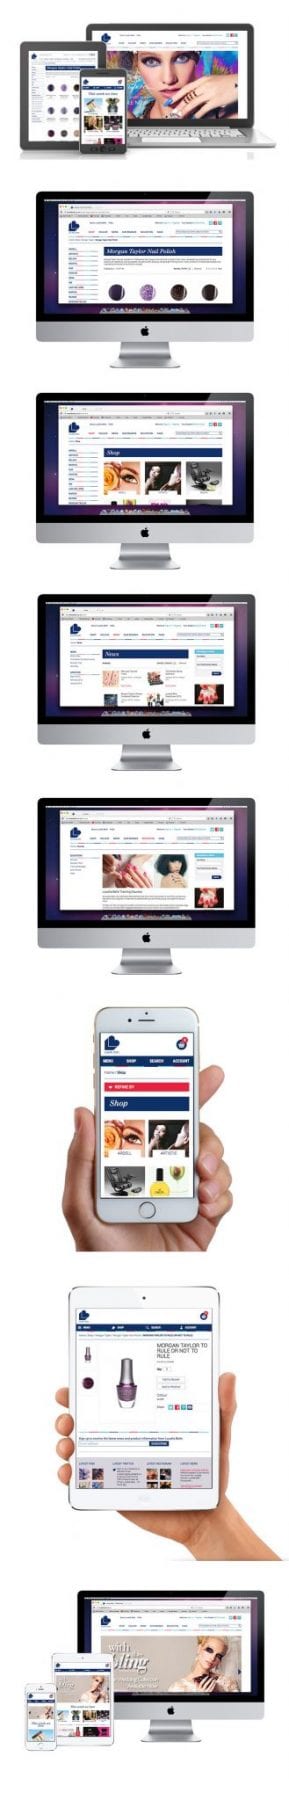 Image of Louella Belle website layouts, designed by graphic designer and branding designer Jessica Croome of Perth WA